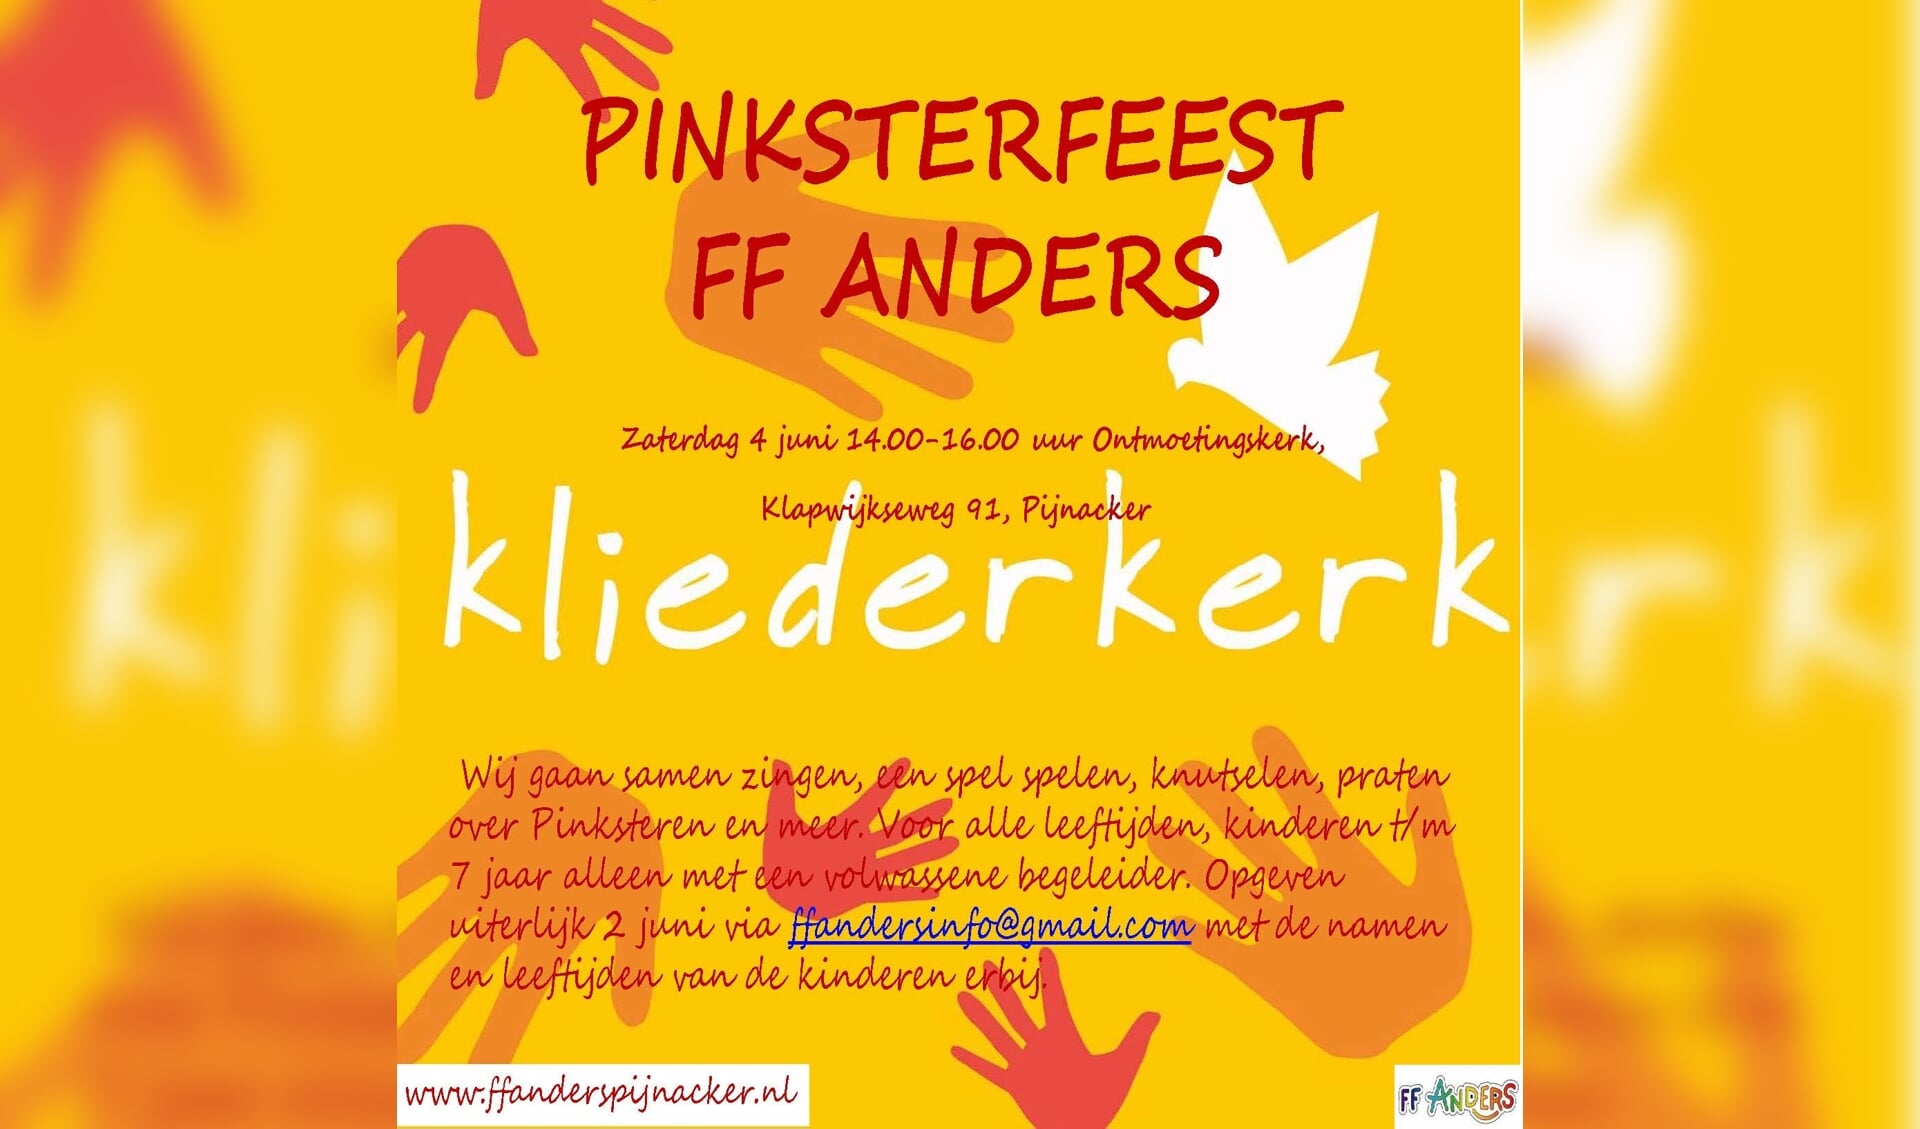 Pinksterfeest FF Anders